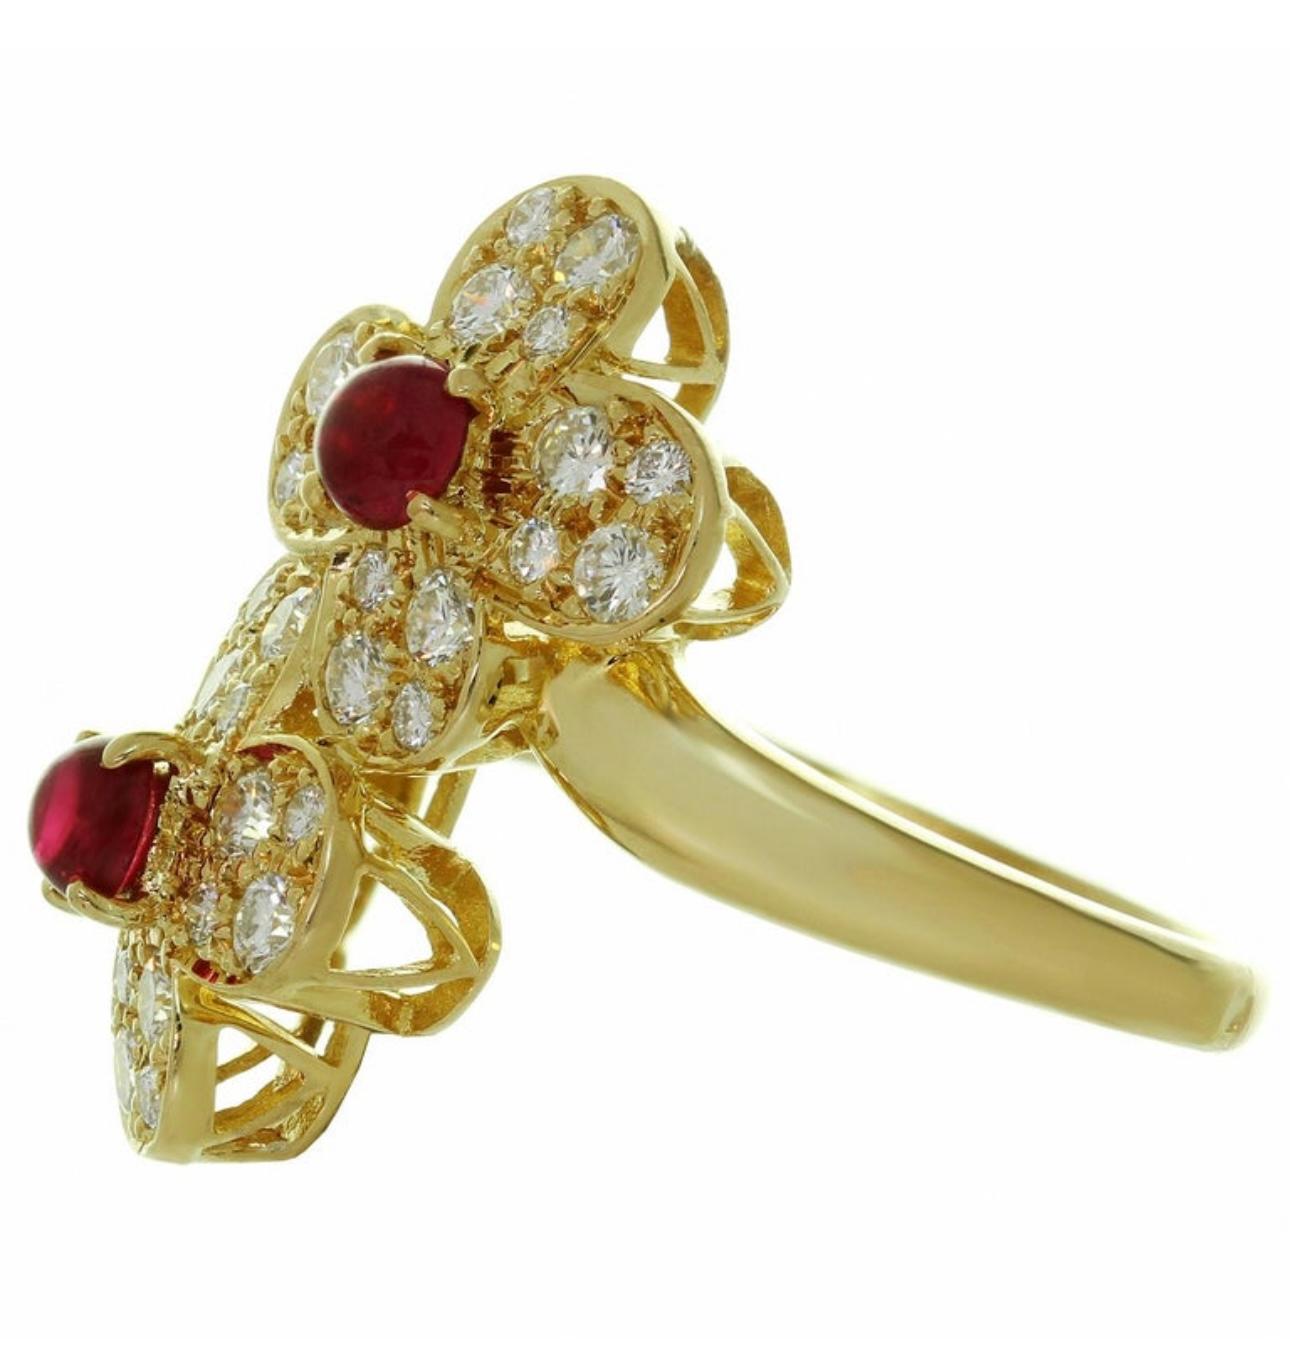 Van Cleef & Arpels Contemporary Ruby and Diamond “Trefle” Ring, 18KY Gold Size 6 For Sale 2